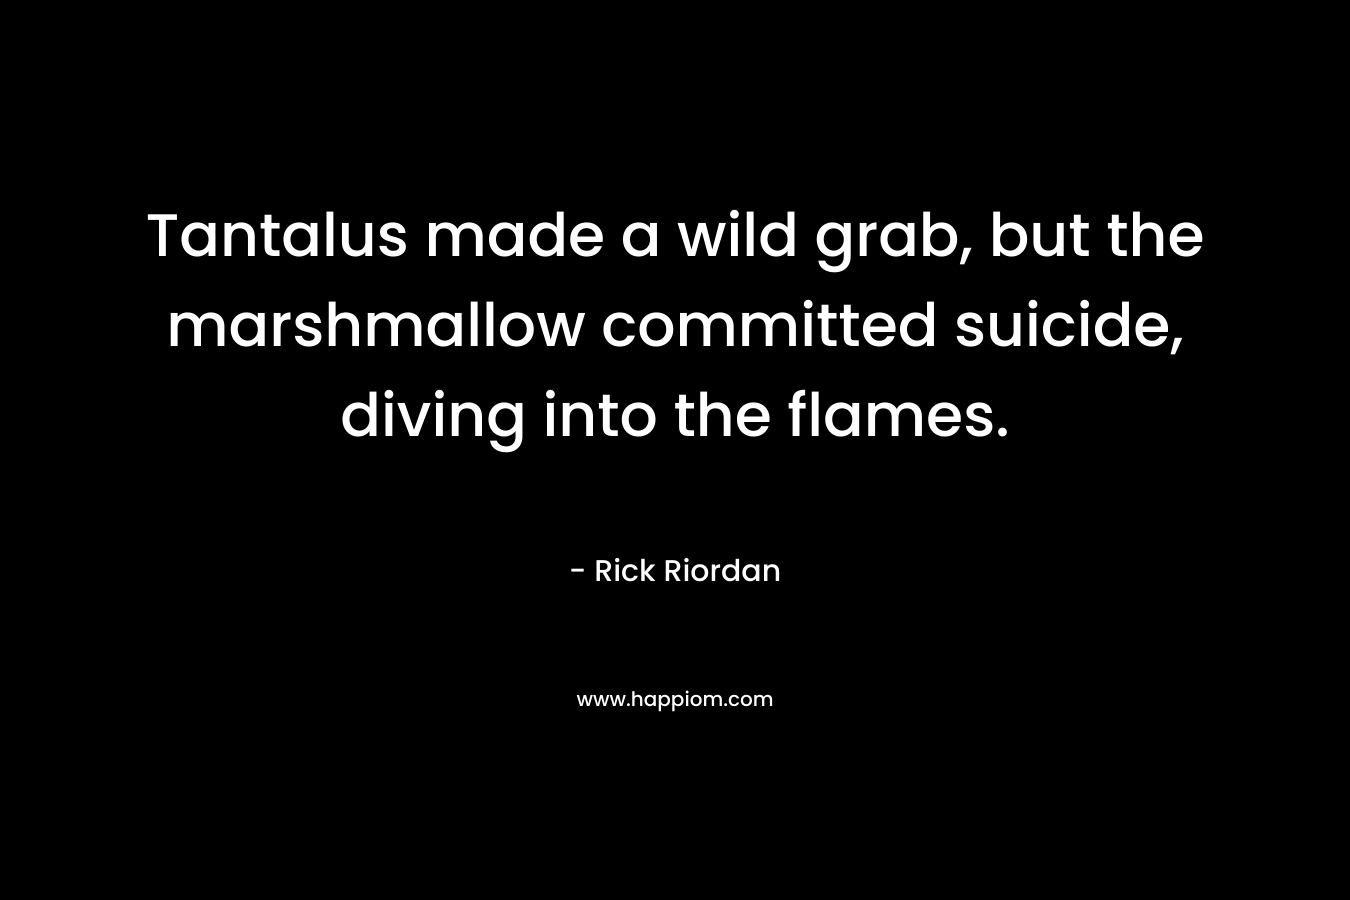 Tantalus made a wild grab, but the marshmallow committed suicide, diving into the flames.